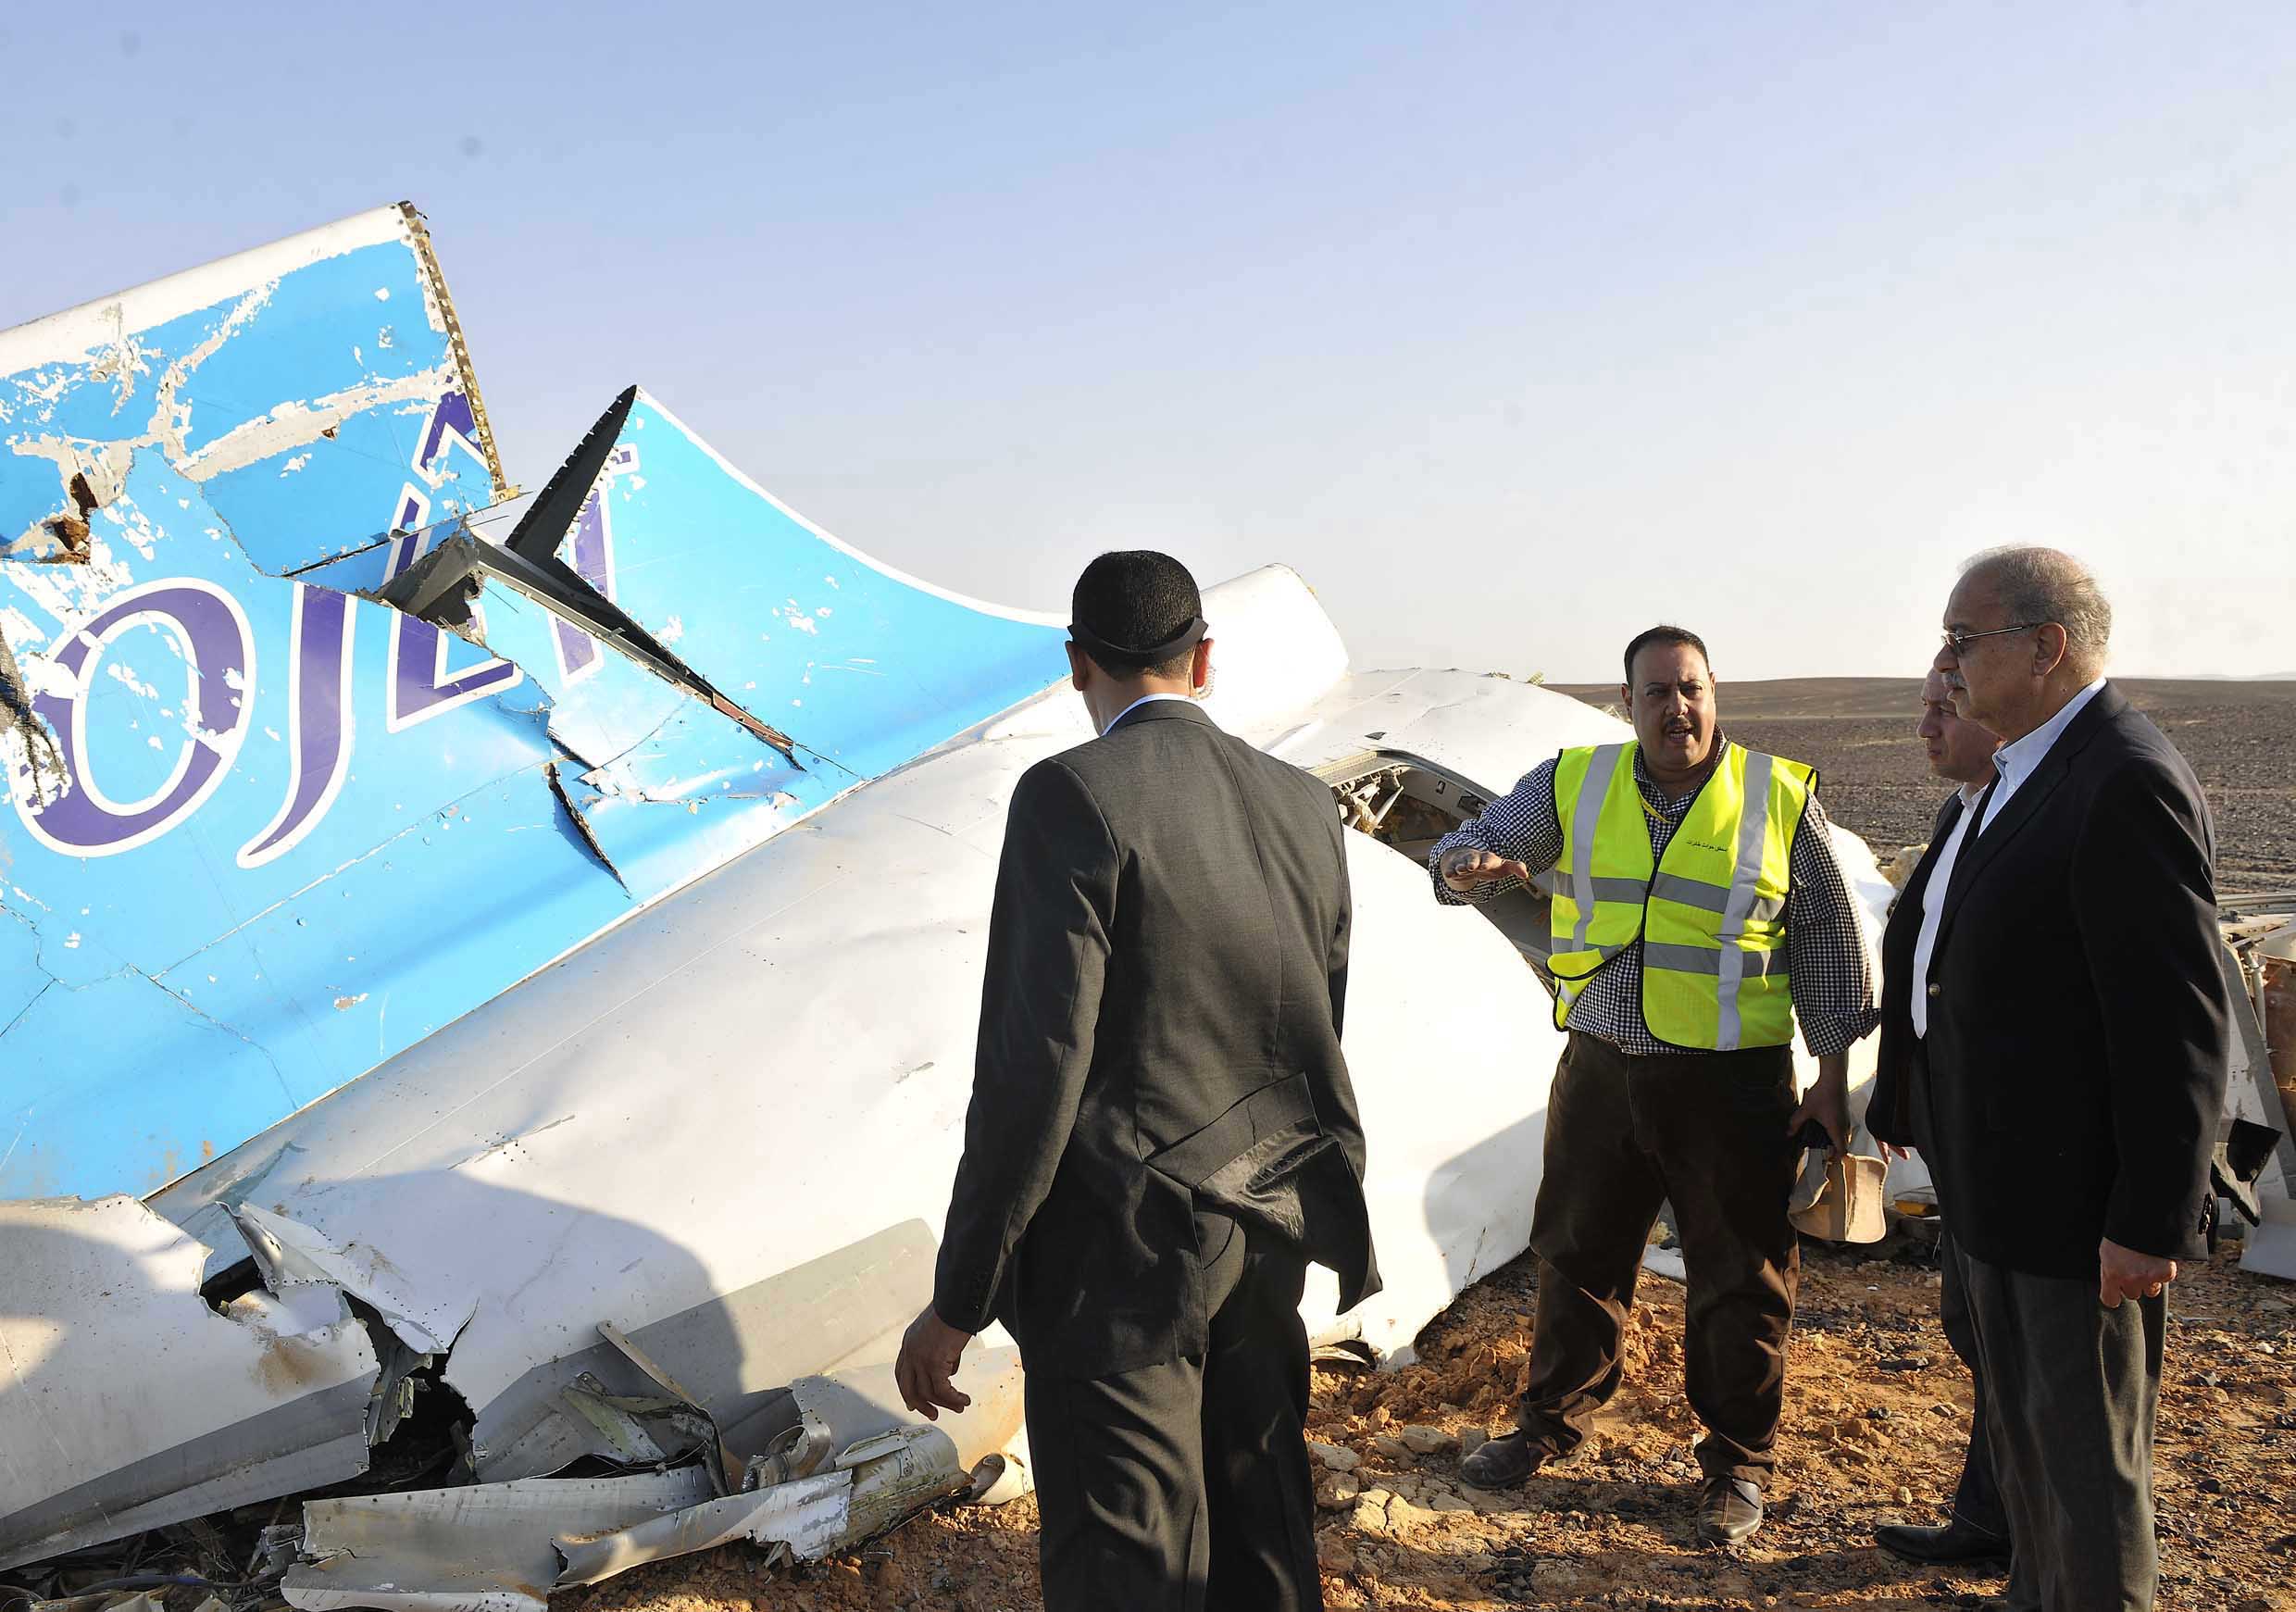 PHOTO: In this image released by the Prime Minister's office, Sherif Ismail, right, looks at the remains of a crashed passenger jet in Hassana Egypt, Oct. 31, 2015.